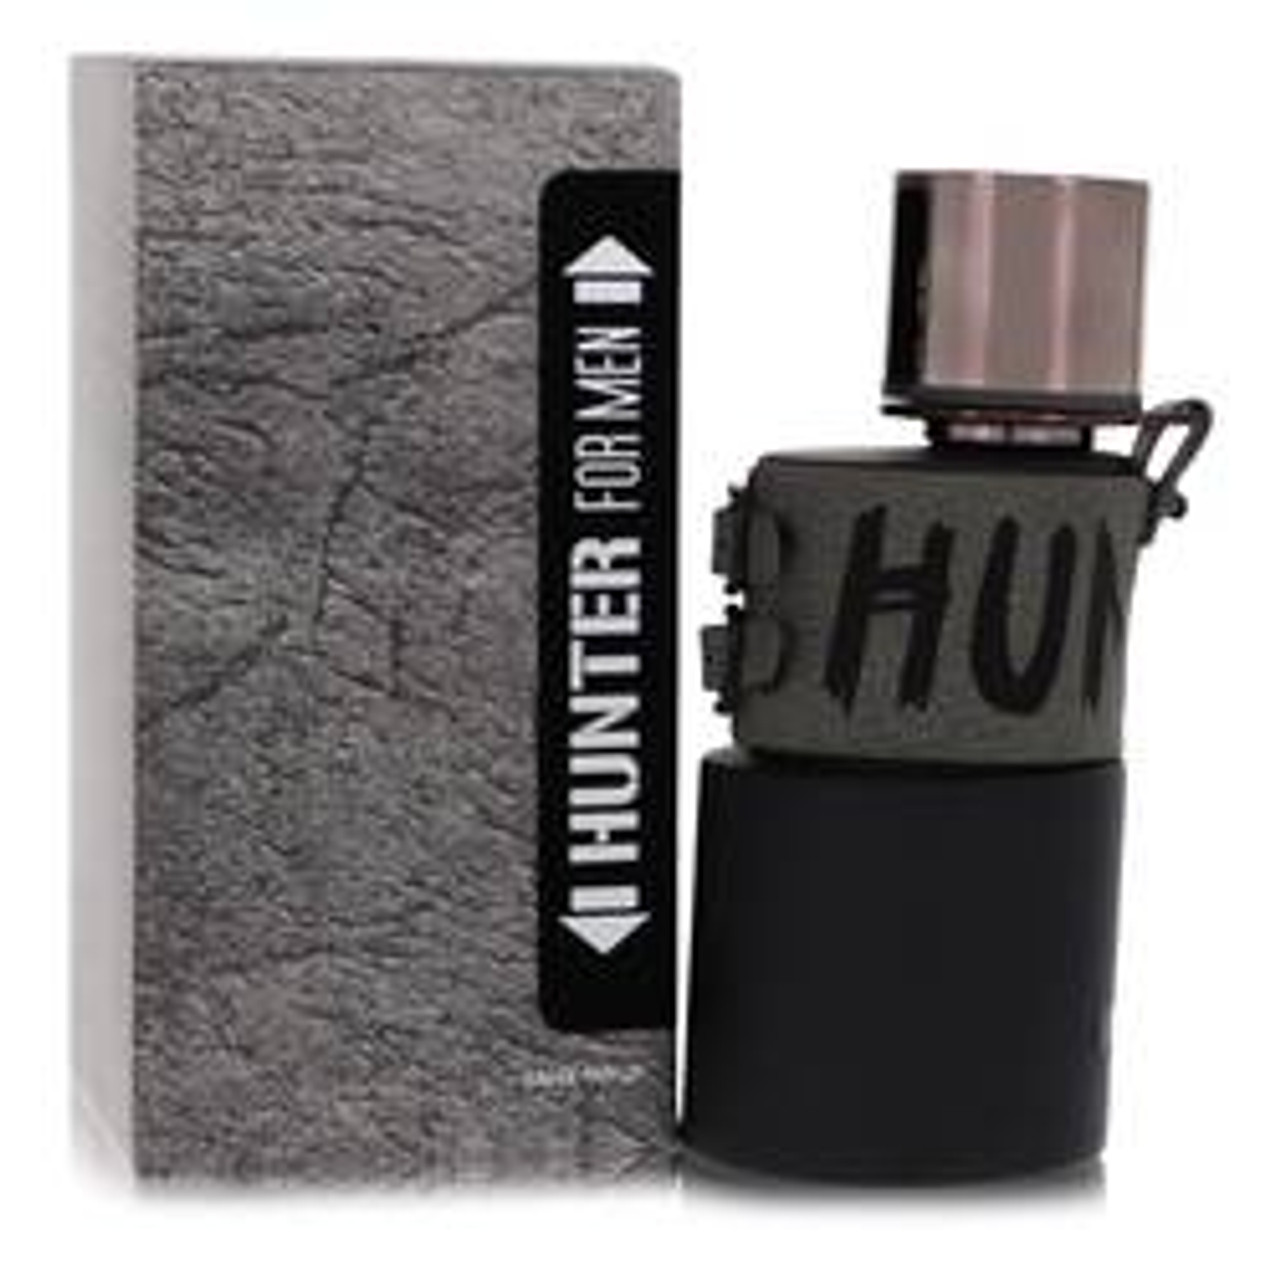 Armaf Hunter Intense Cologne By Armaf Eau De Parfum Spray 3.4 oz for Men - [From 100.00 - Choose pk Qty ] - *Ships from Miami